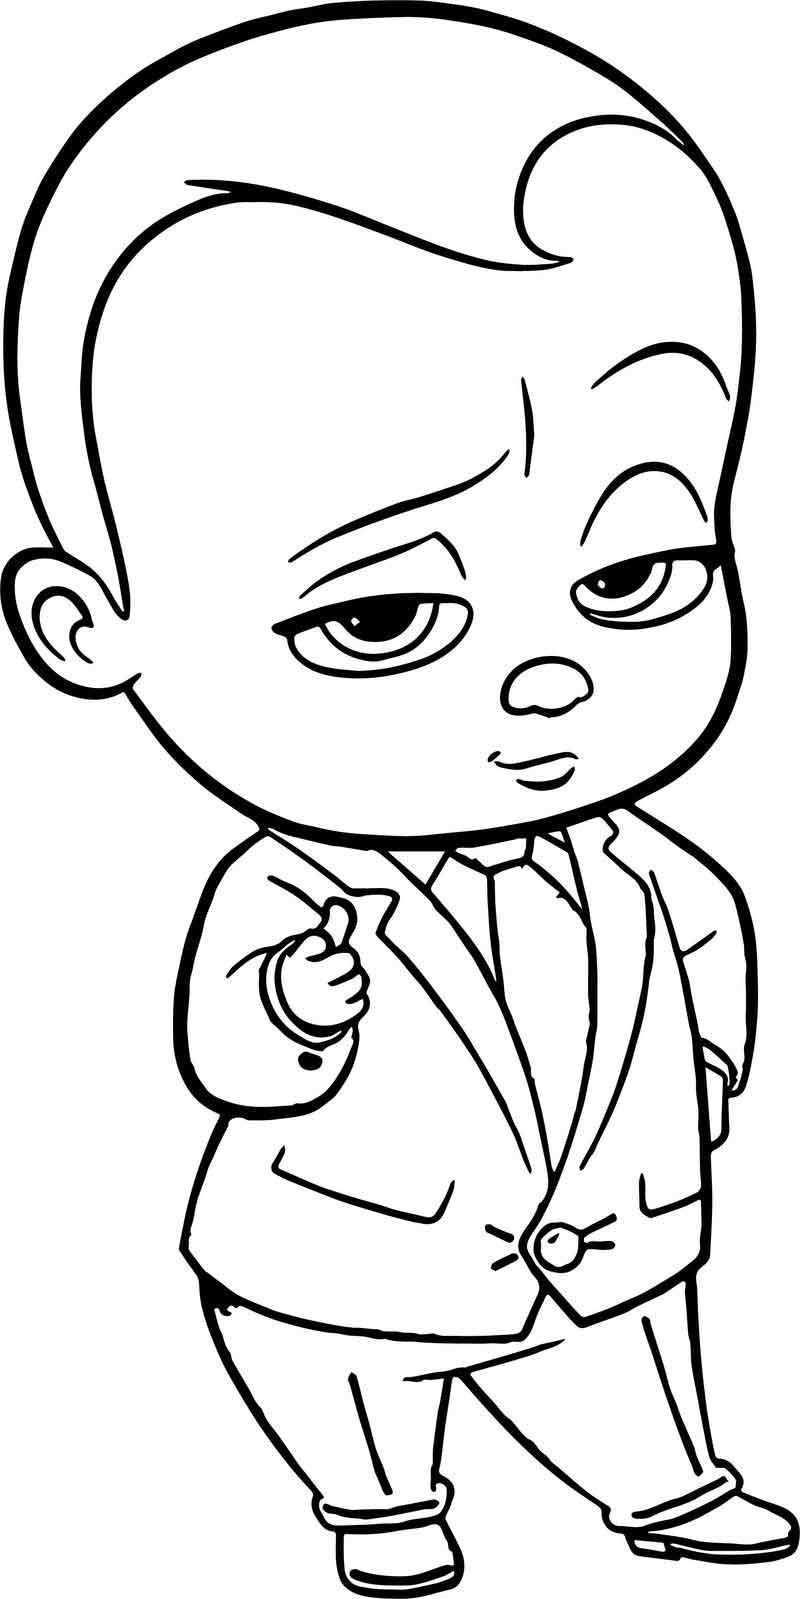 The Boss Baby Coloring Pages Baby Coloring Pages Cartoon Coloring Pages Coloring Page